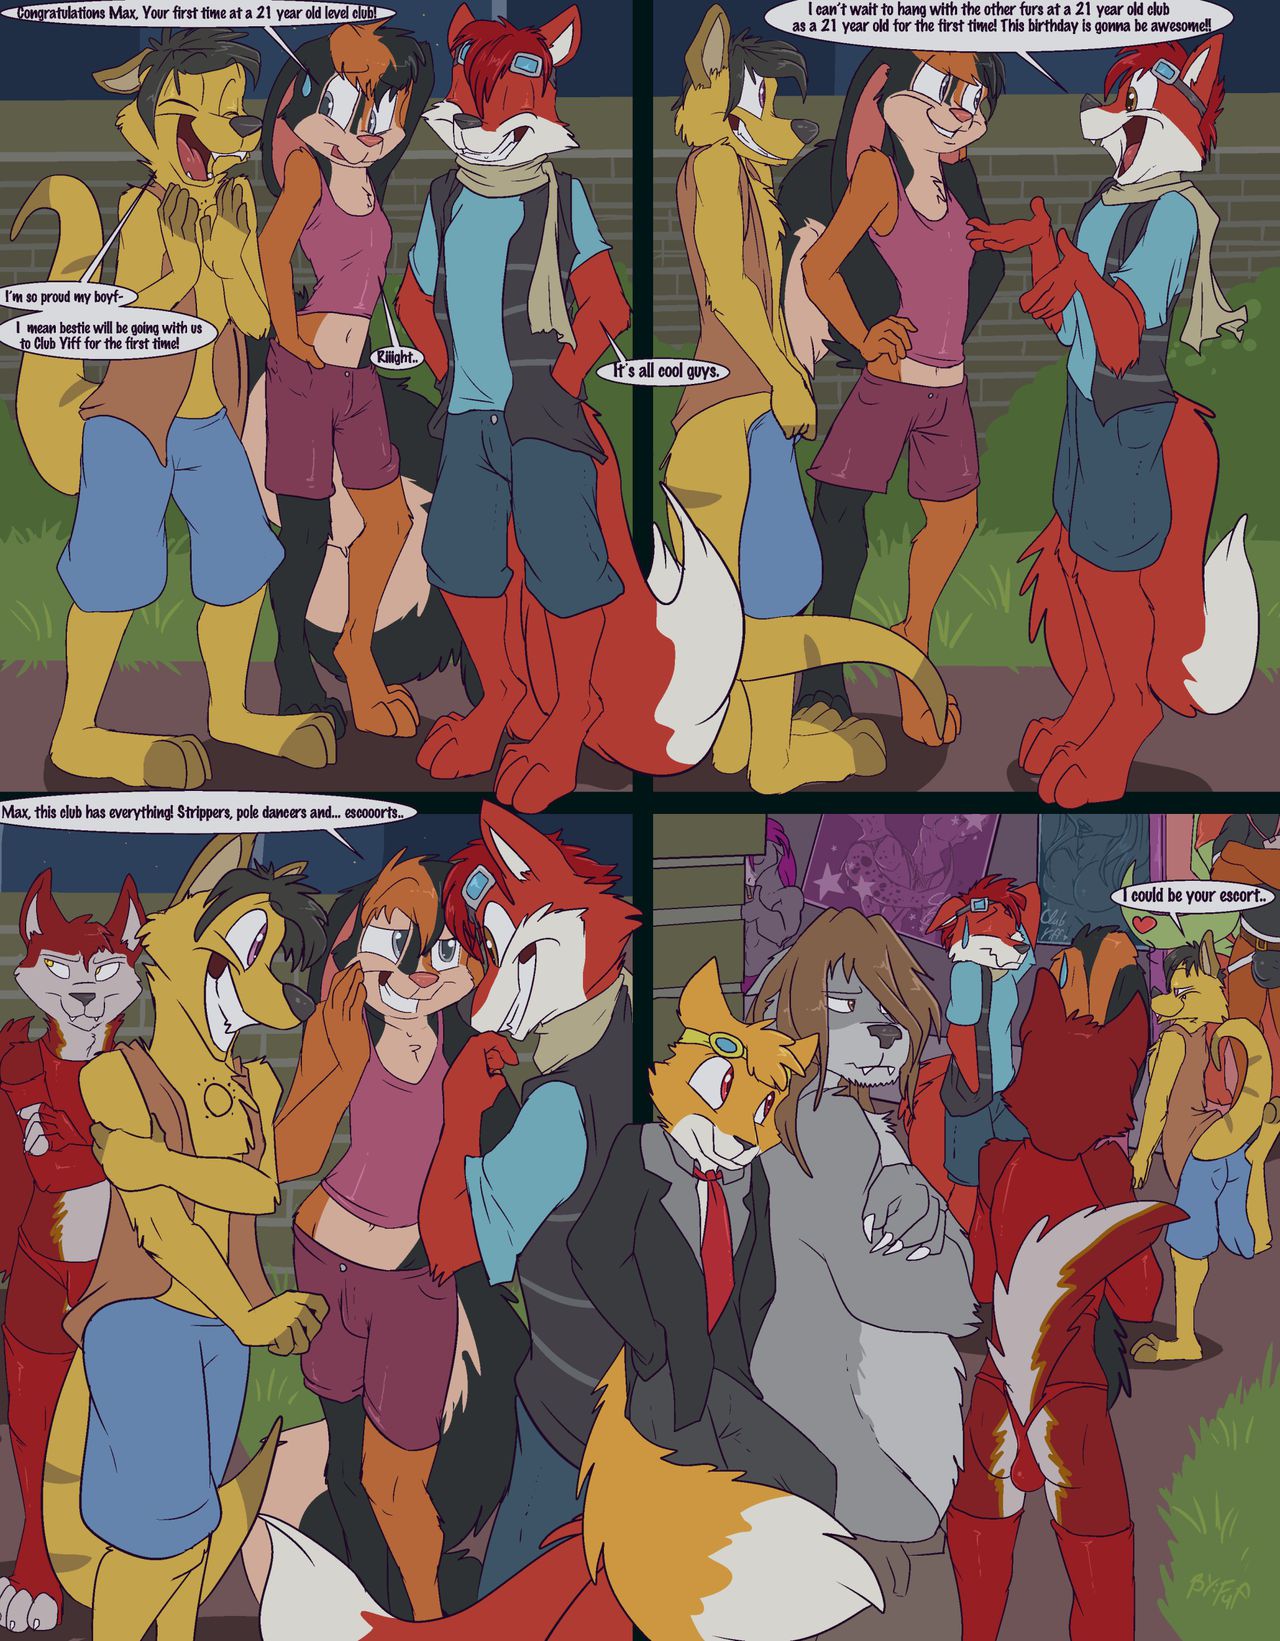 [Fuf] Birthday Party at Club Yiff (complete) 2